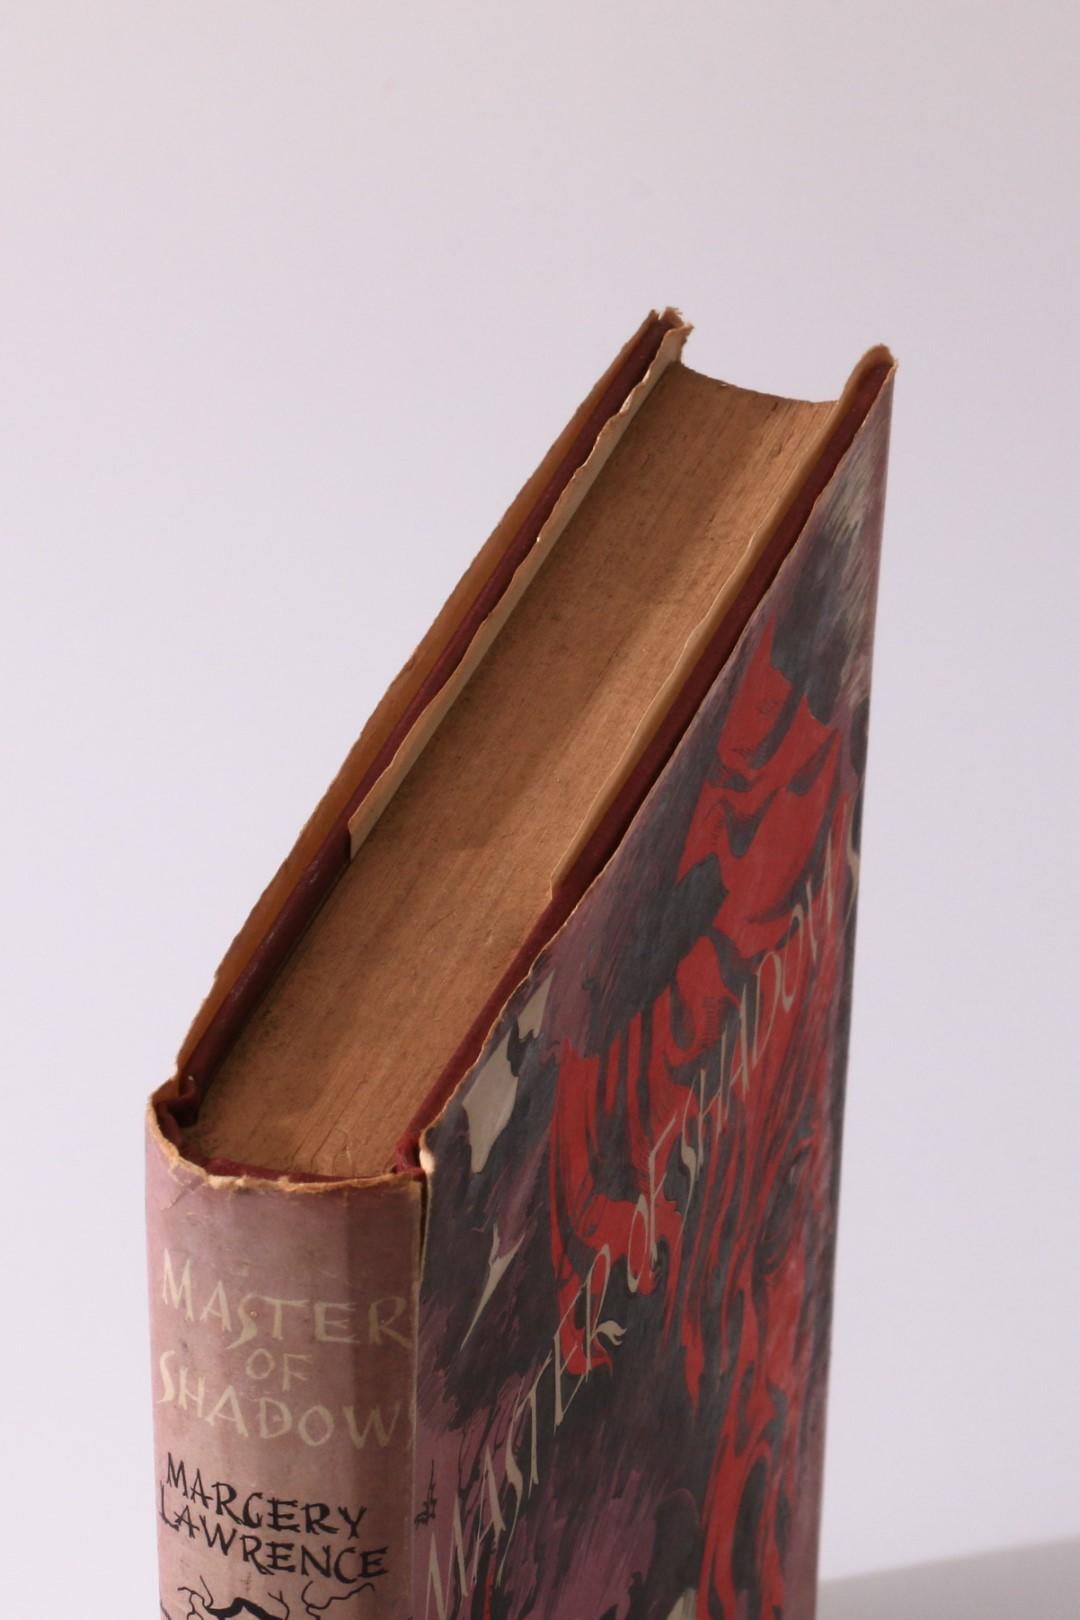 Margery Lawrence - Master of Shadow - Robert Hale, 1959, First Edition.